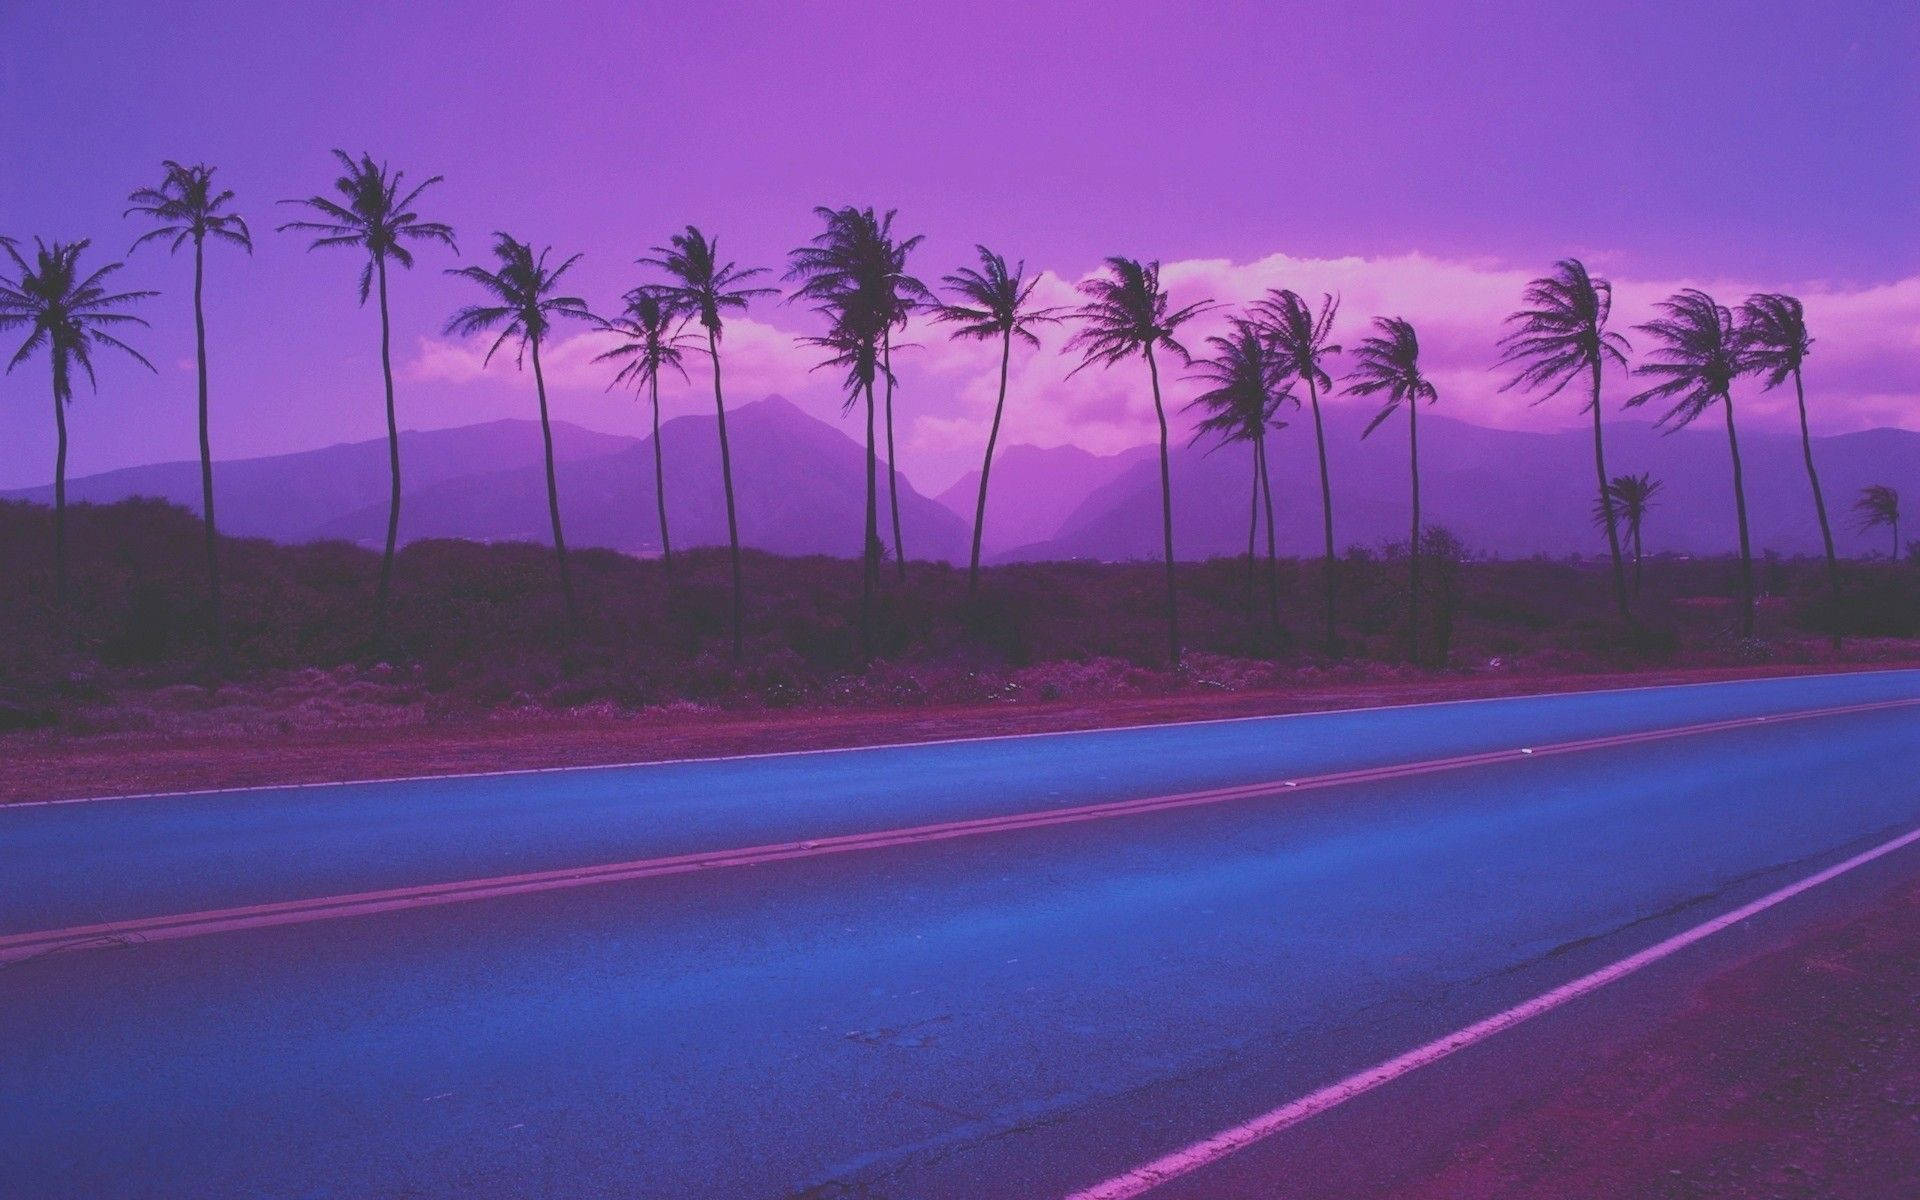 Aesthetic Violet Countryside Wallpaper